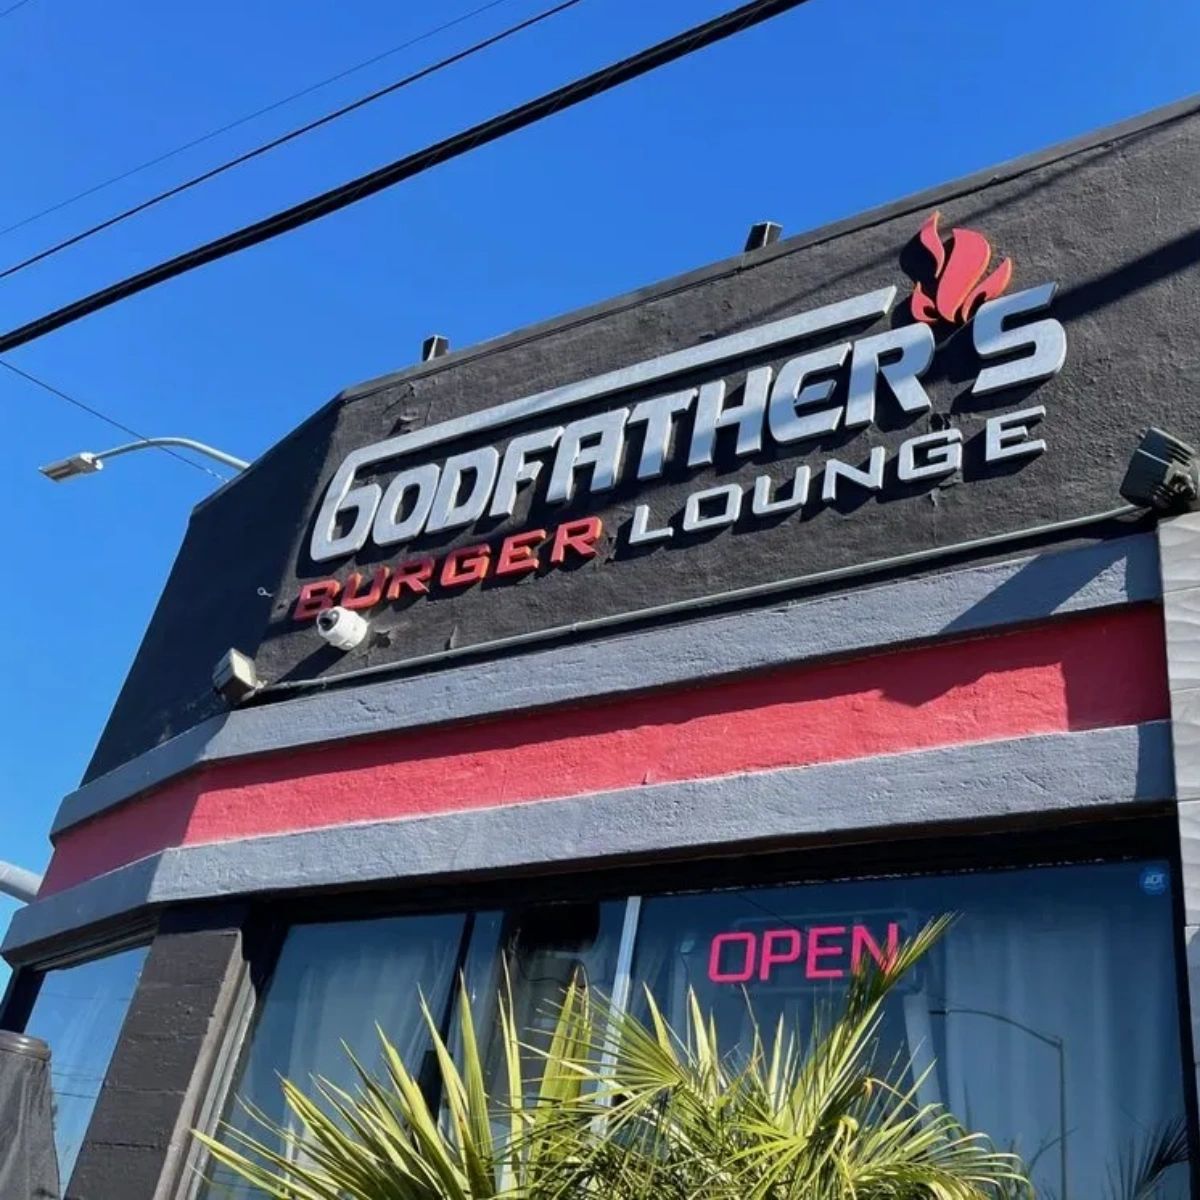 Over the past 13 years, we've been the spot that Belmont locals can frequent to satisfy their burger cravings, and we wouldn't have it any other way! 🍔 #GodfathersBurgerLounge #BelmontEats #BelmontFood #BayAreaFoodie #BayAreaEats